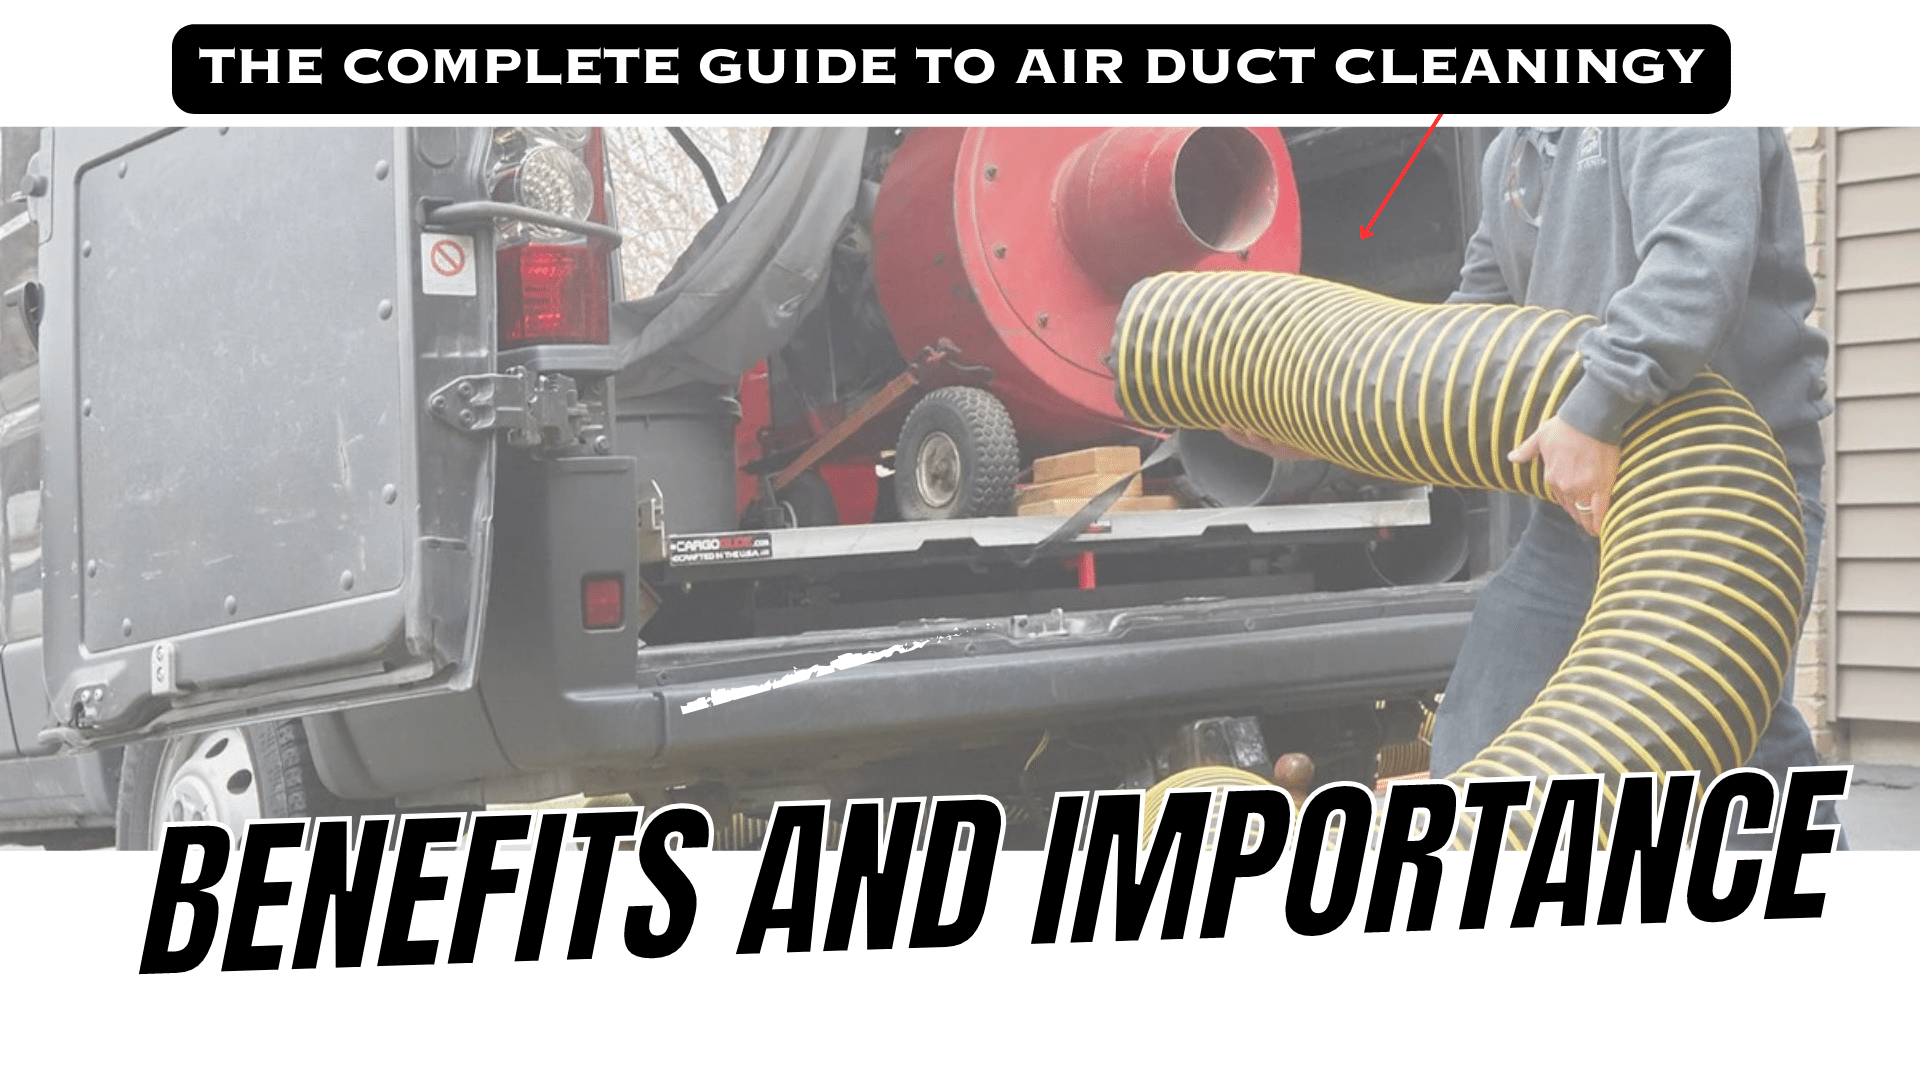 The Complete Guide to Air Duct Cleaning